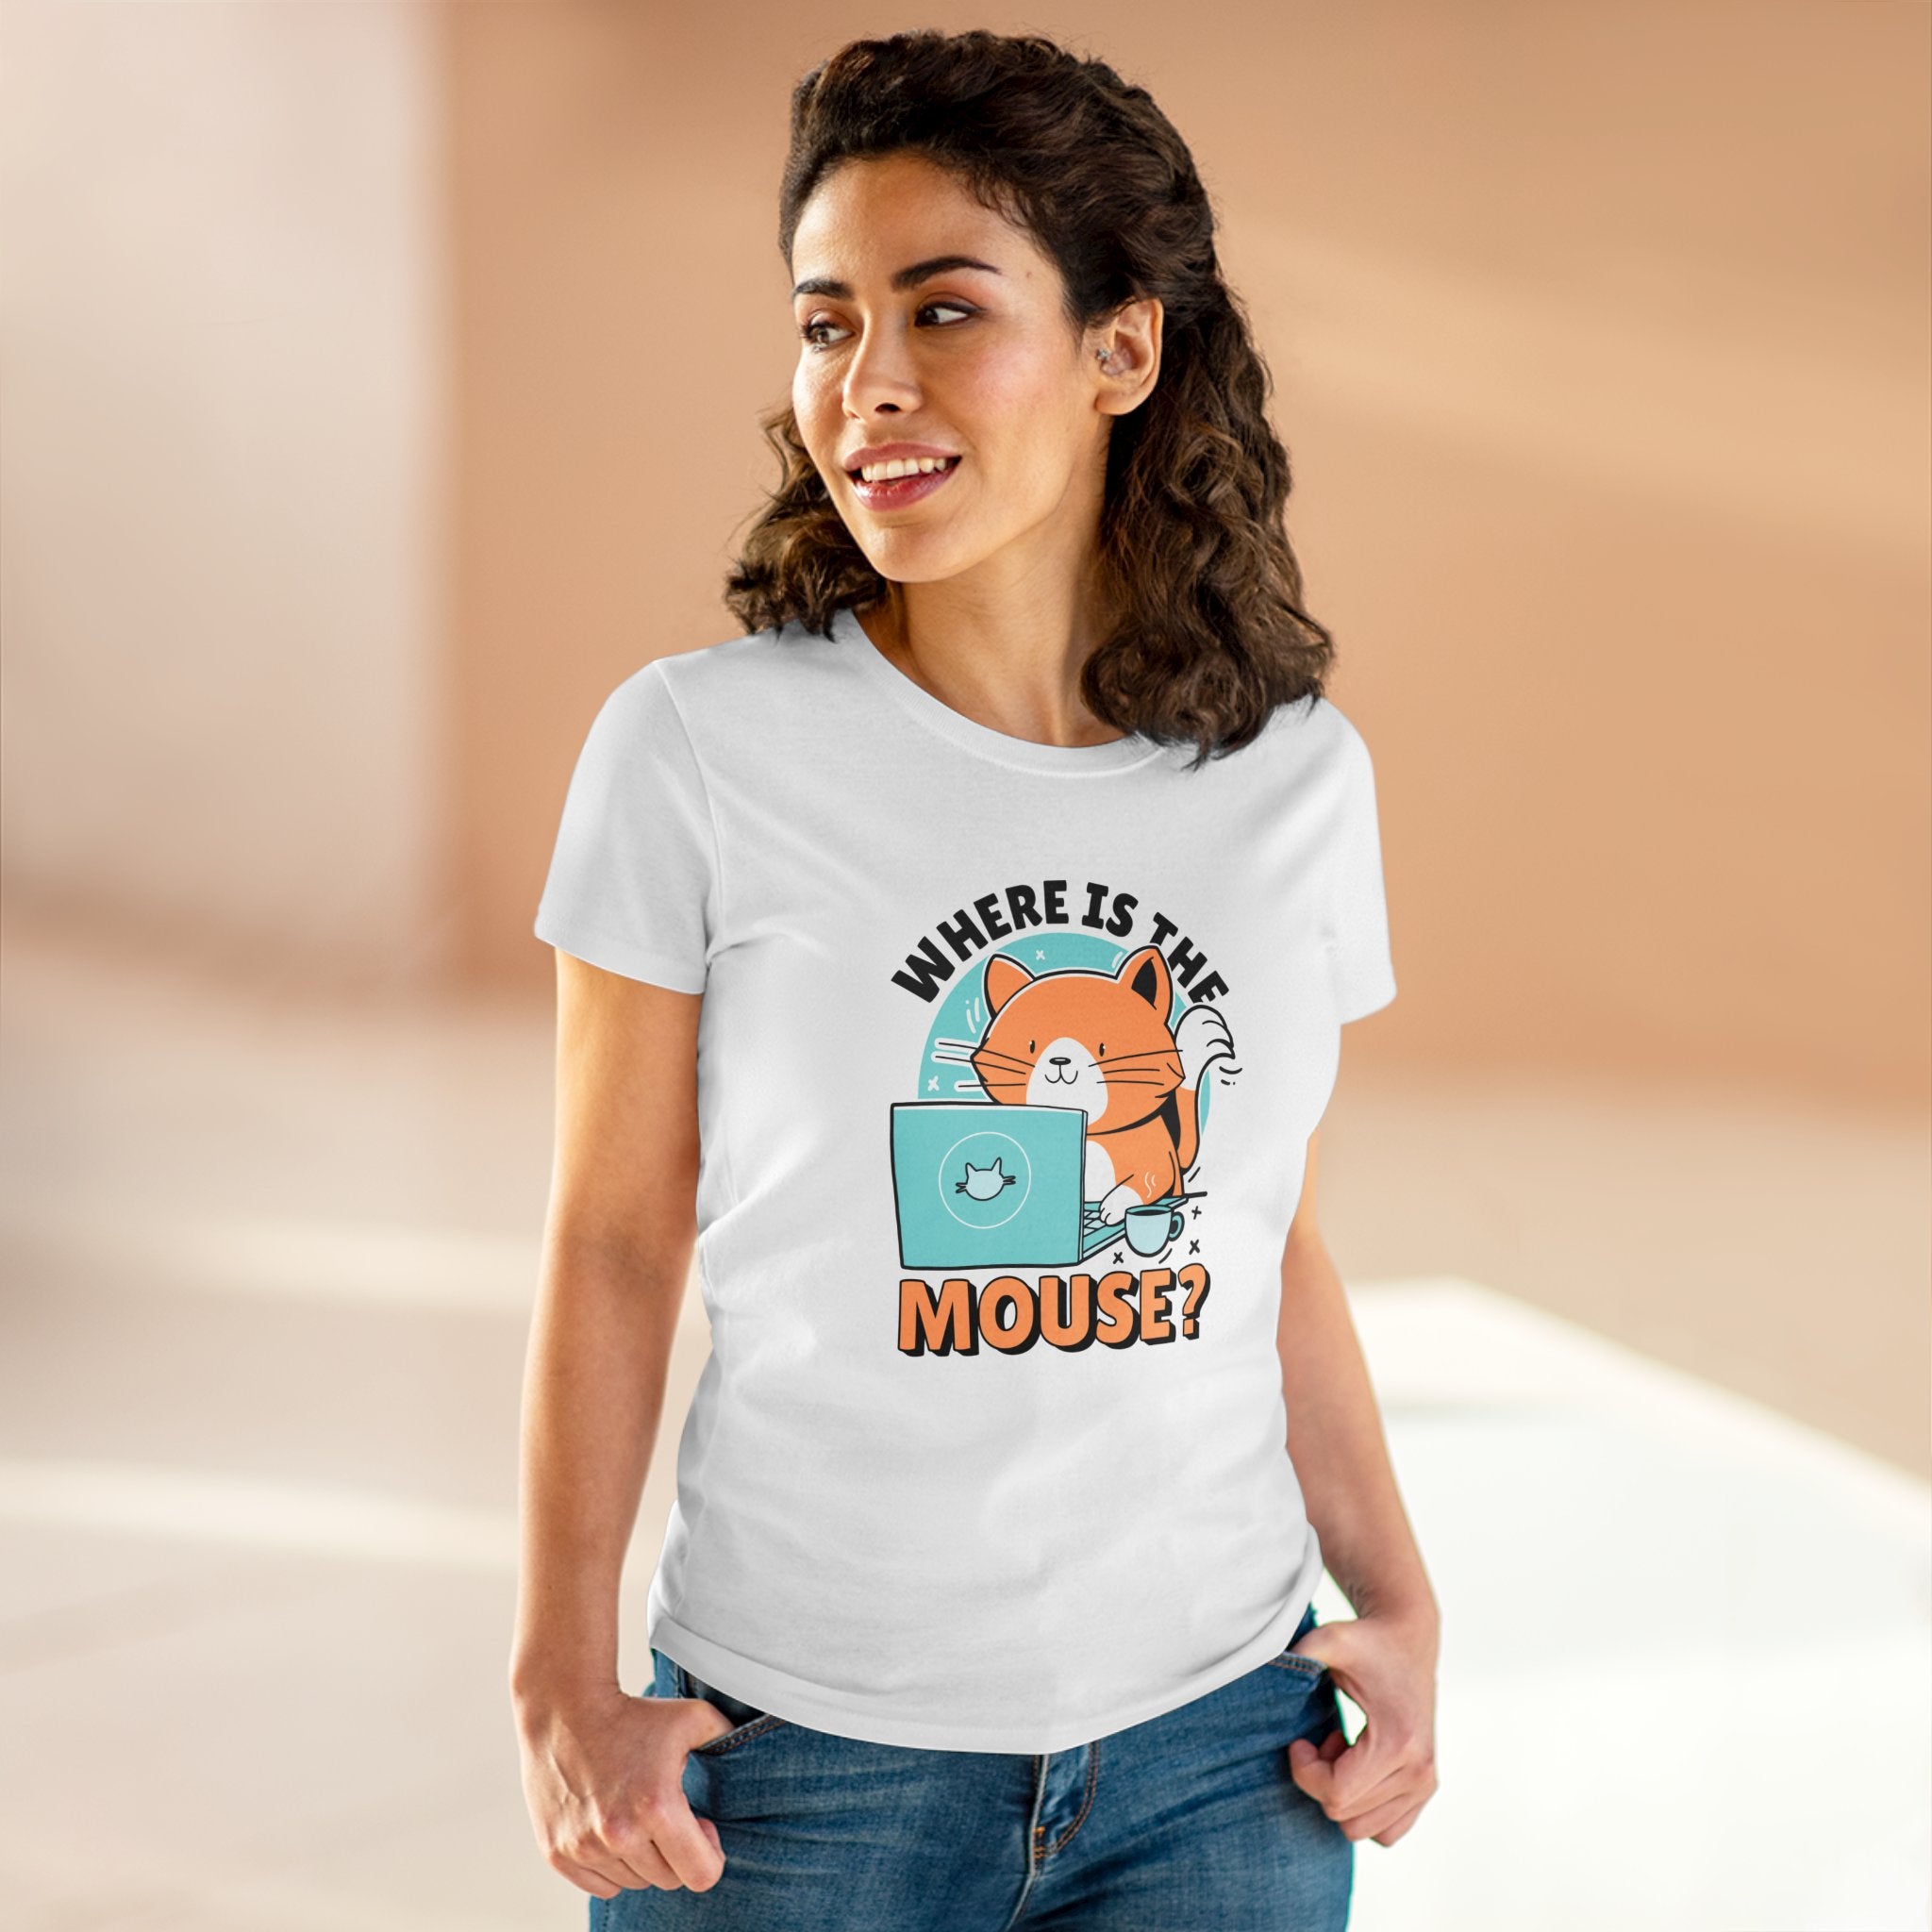 A person is wearing a white Mouse Cat - Women's Tee made of pre-shrunk cotton, featuring a cartoon cat holding a monitor and text that reads "Where is the mouse?".